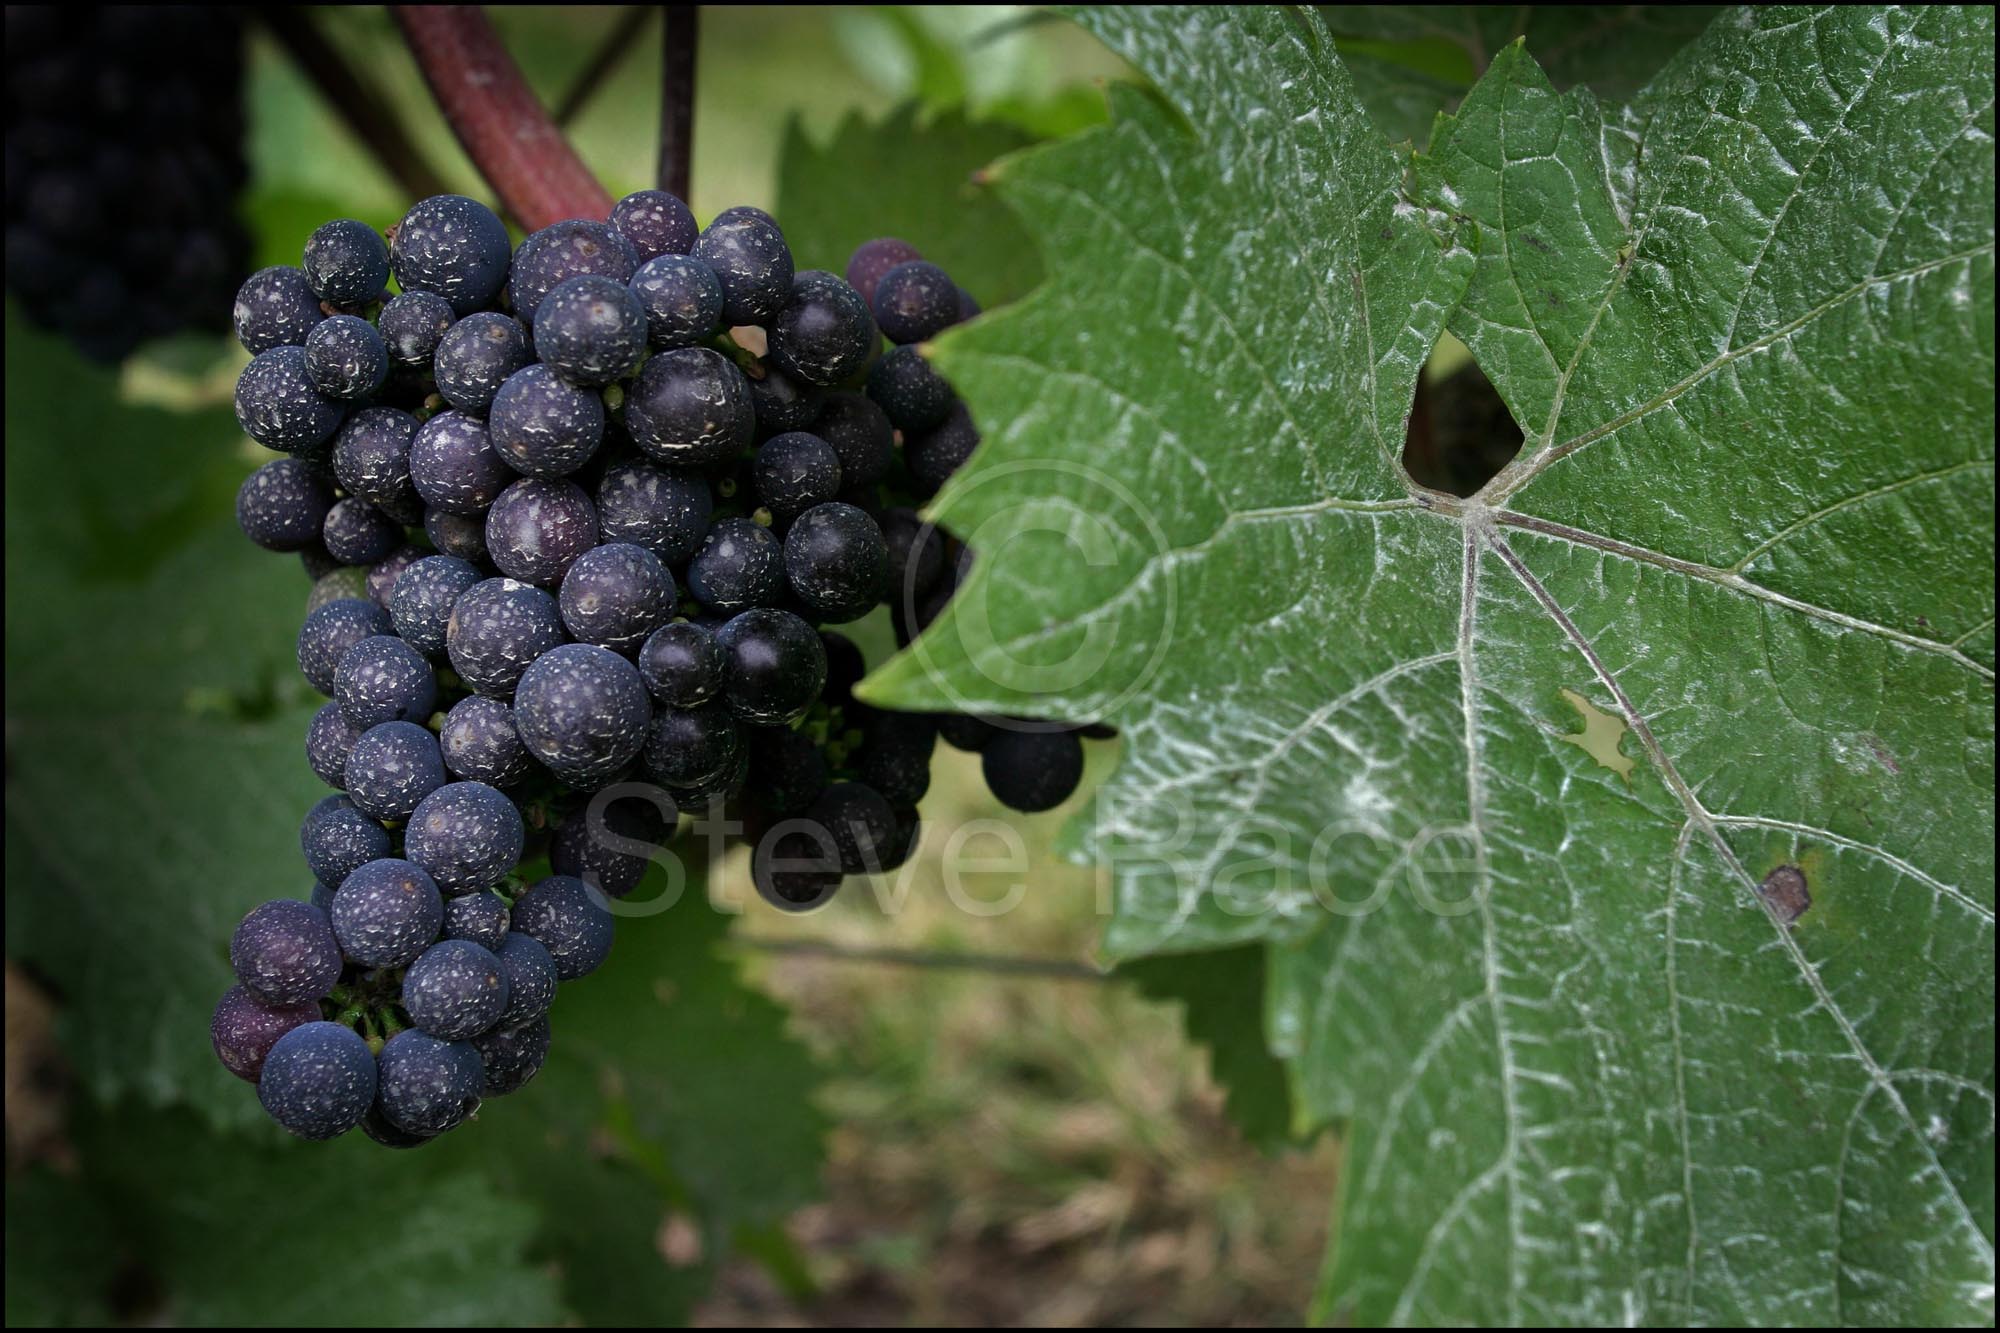 Steve's Triomphe grapes, from the 